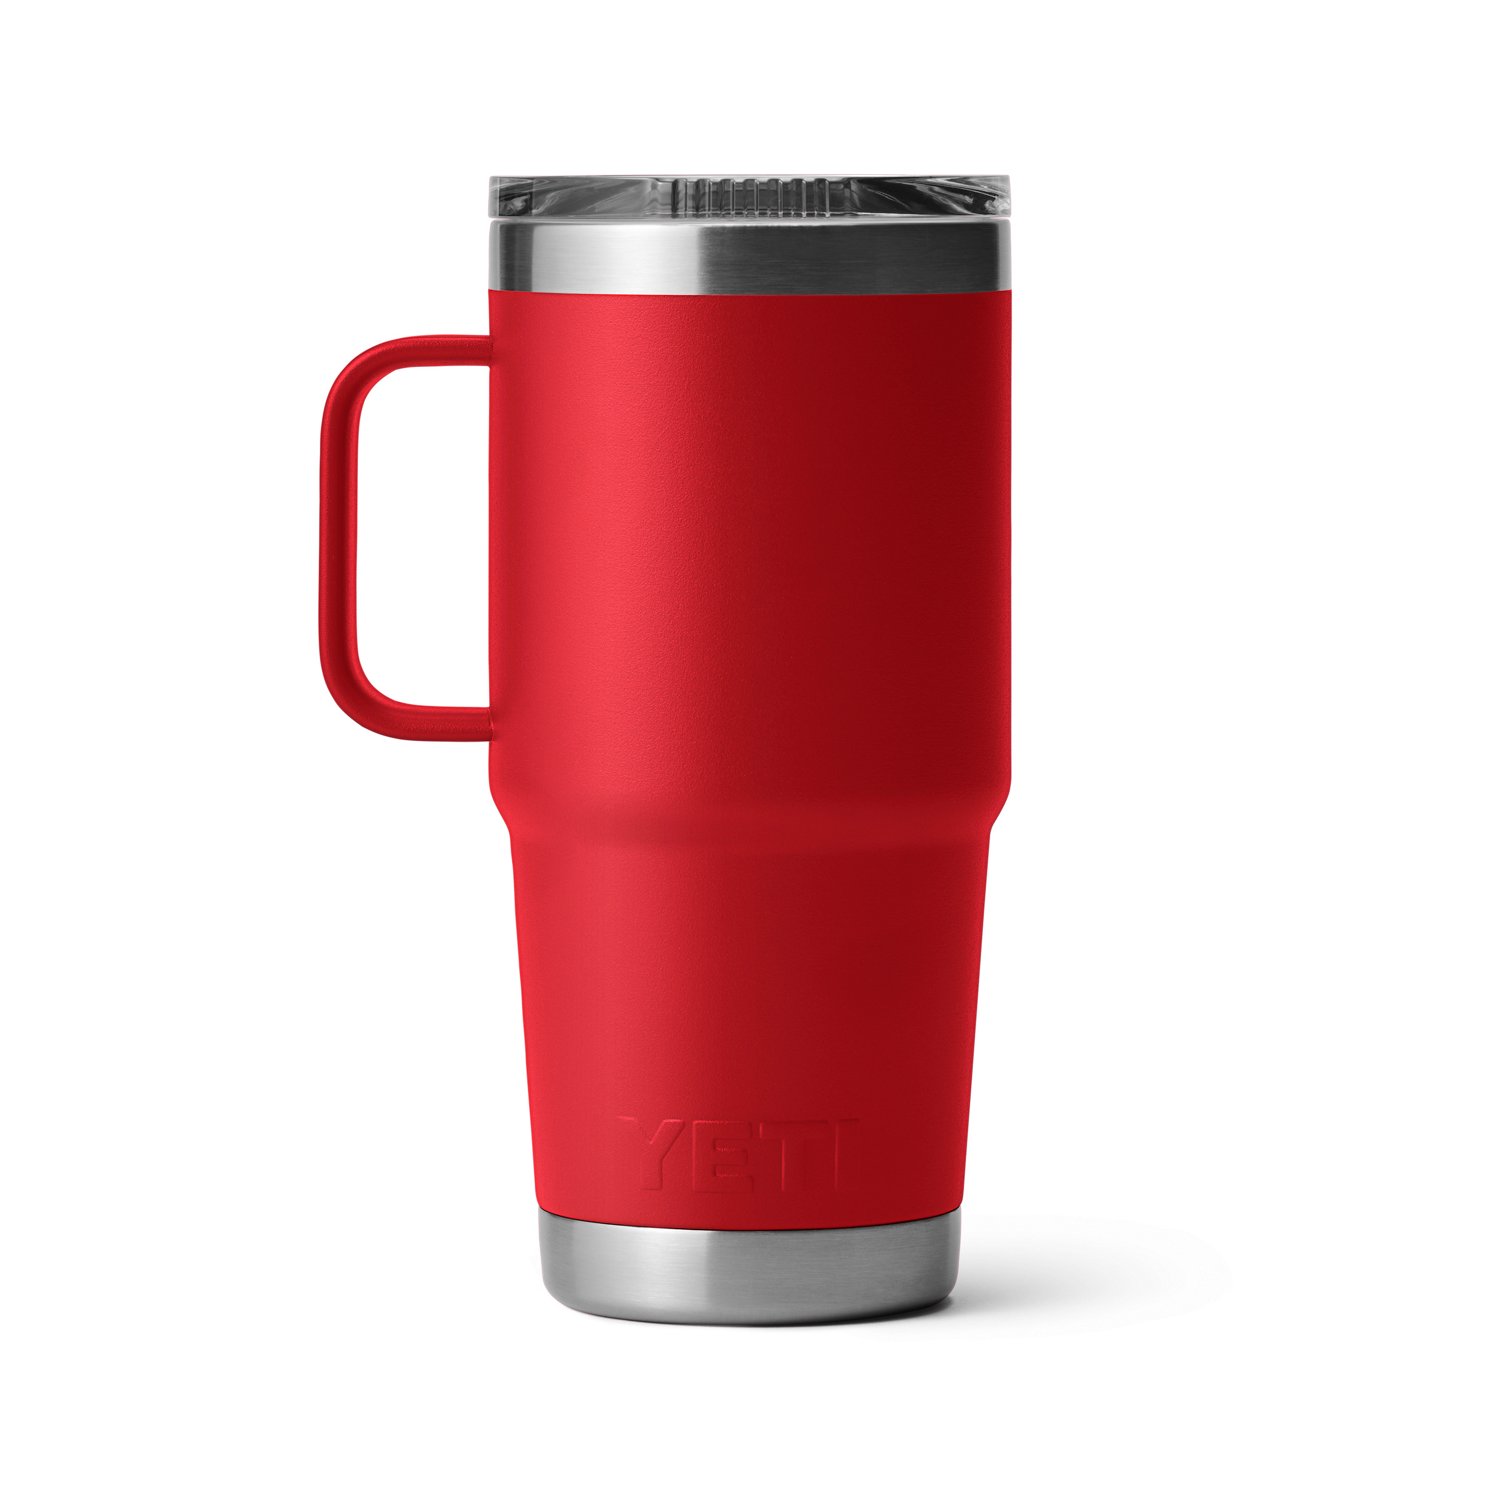 https://academy.scene7.com/is/image/academy//drinkware/yeti-rambler-20-oz-travel-mug-with-stronghold-lid-21071501392-red/d37fa58882d04b3a96f6a1c4c9020775